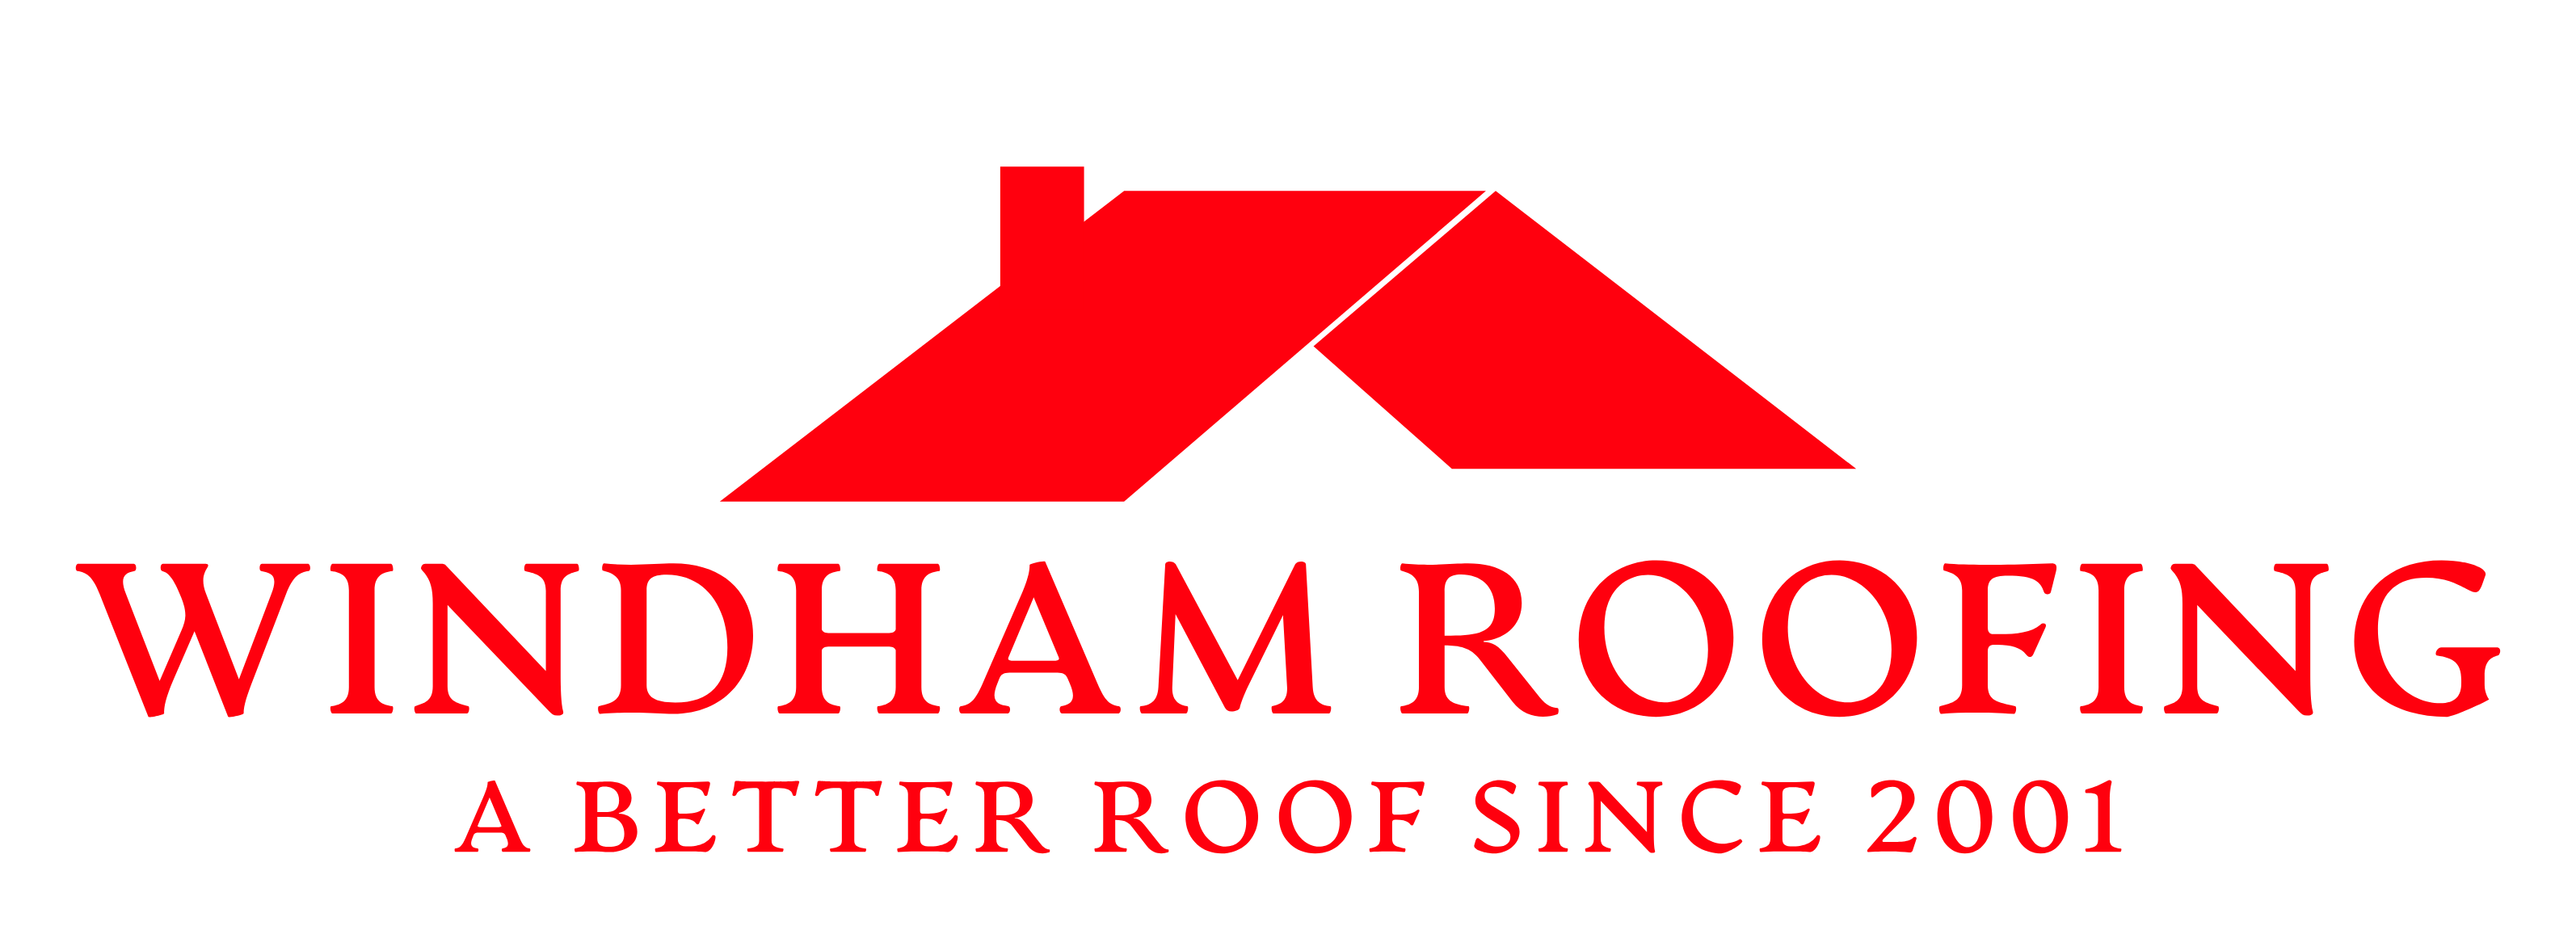 Windham Roofing & Gutters Logo